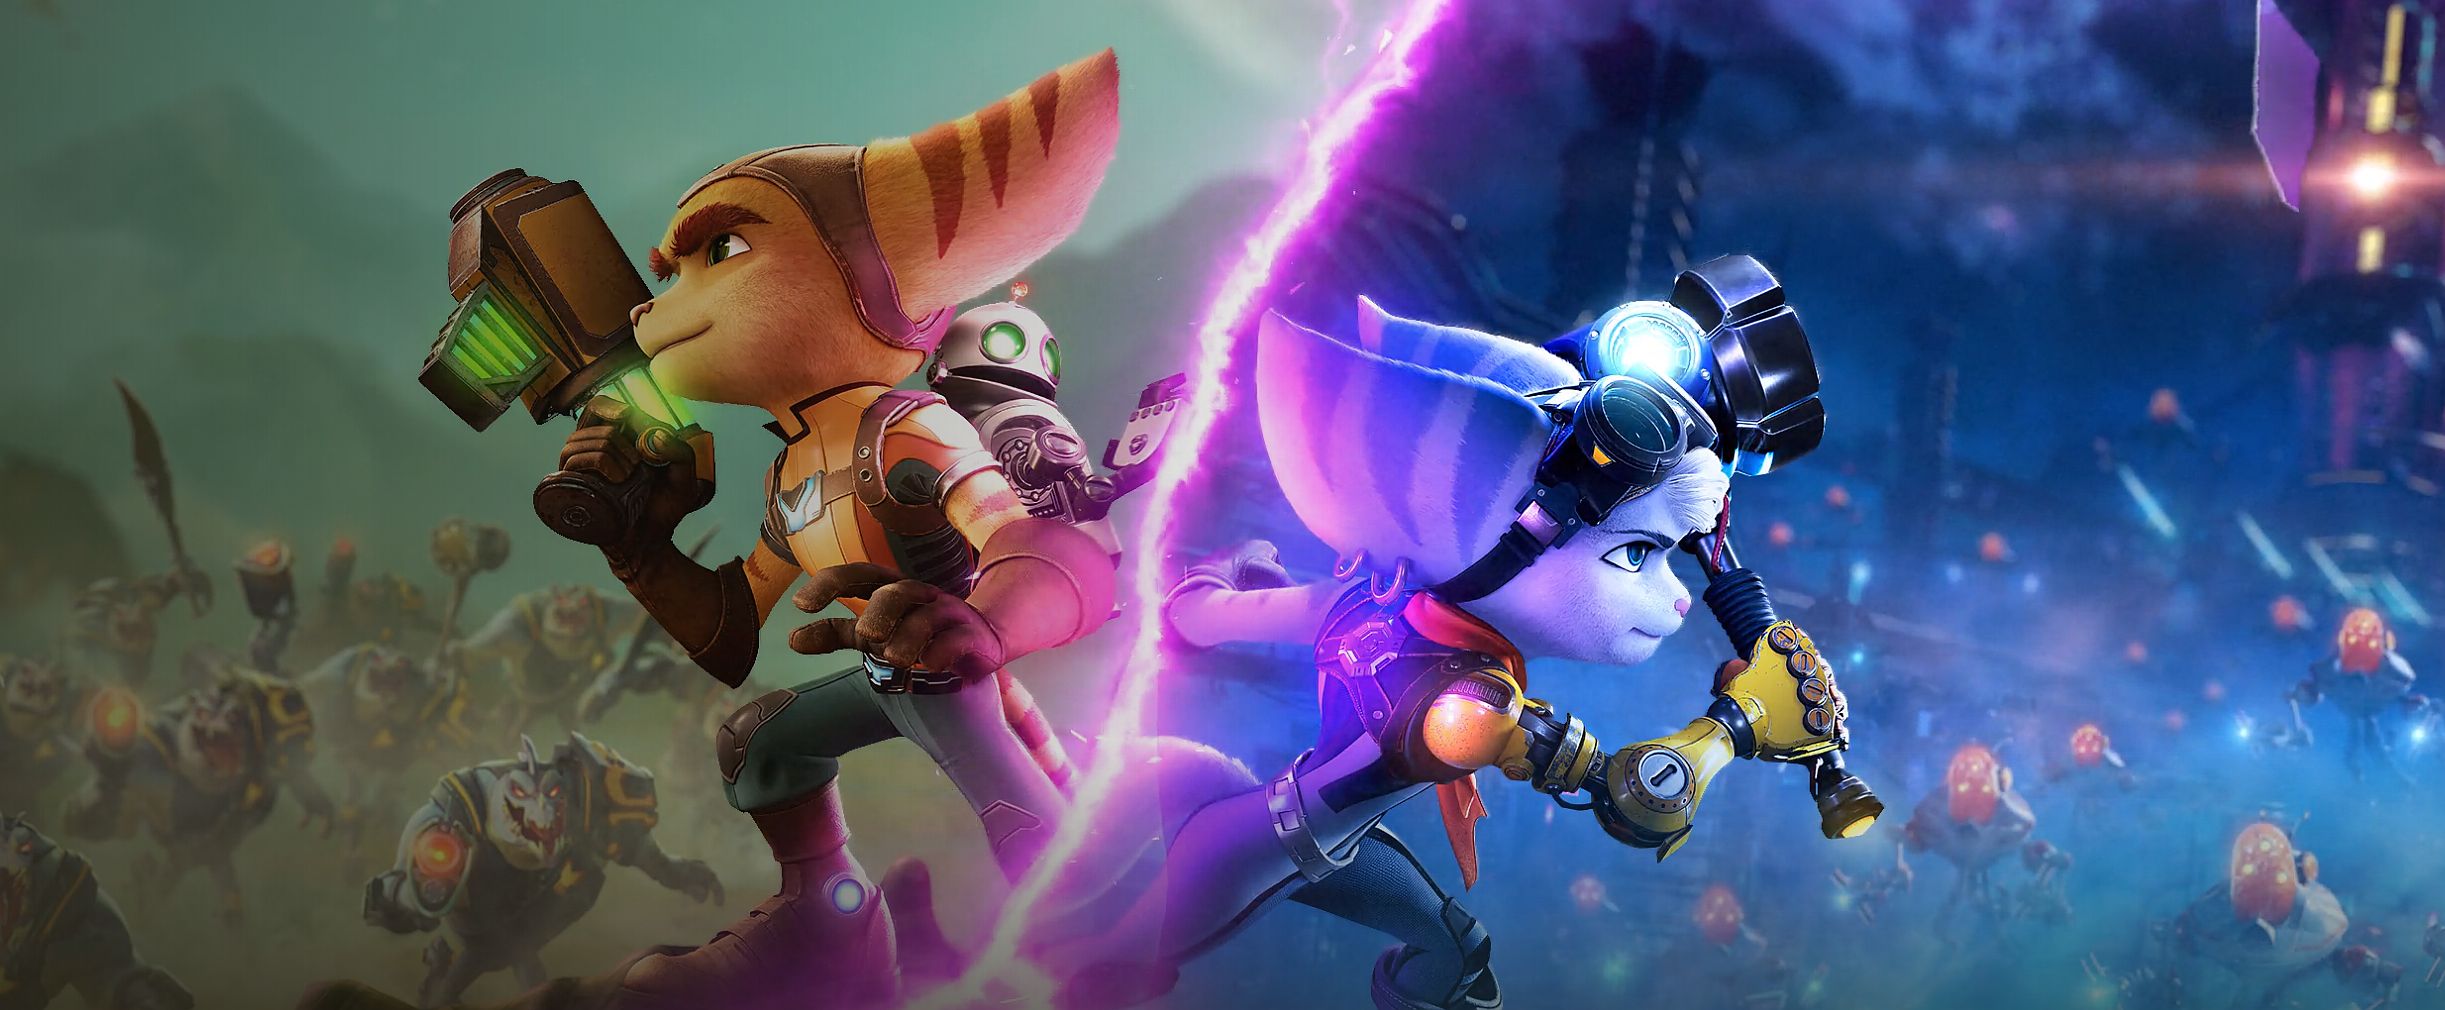 Image for Ratchet & Clank: Rift Apart patch adds 120 Hz display mode